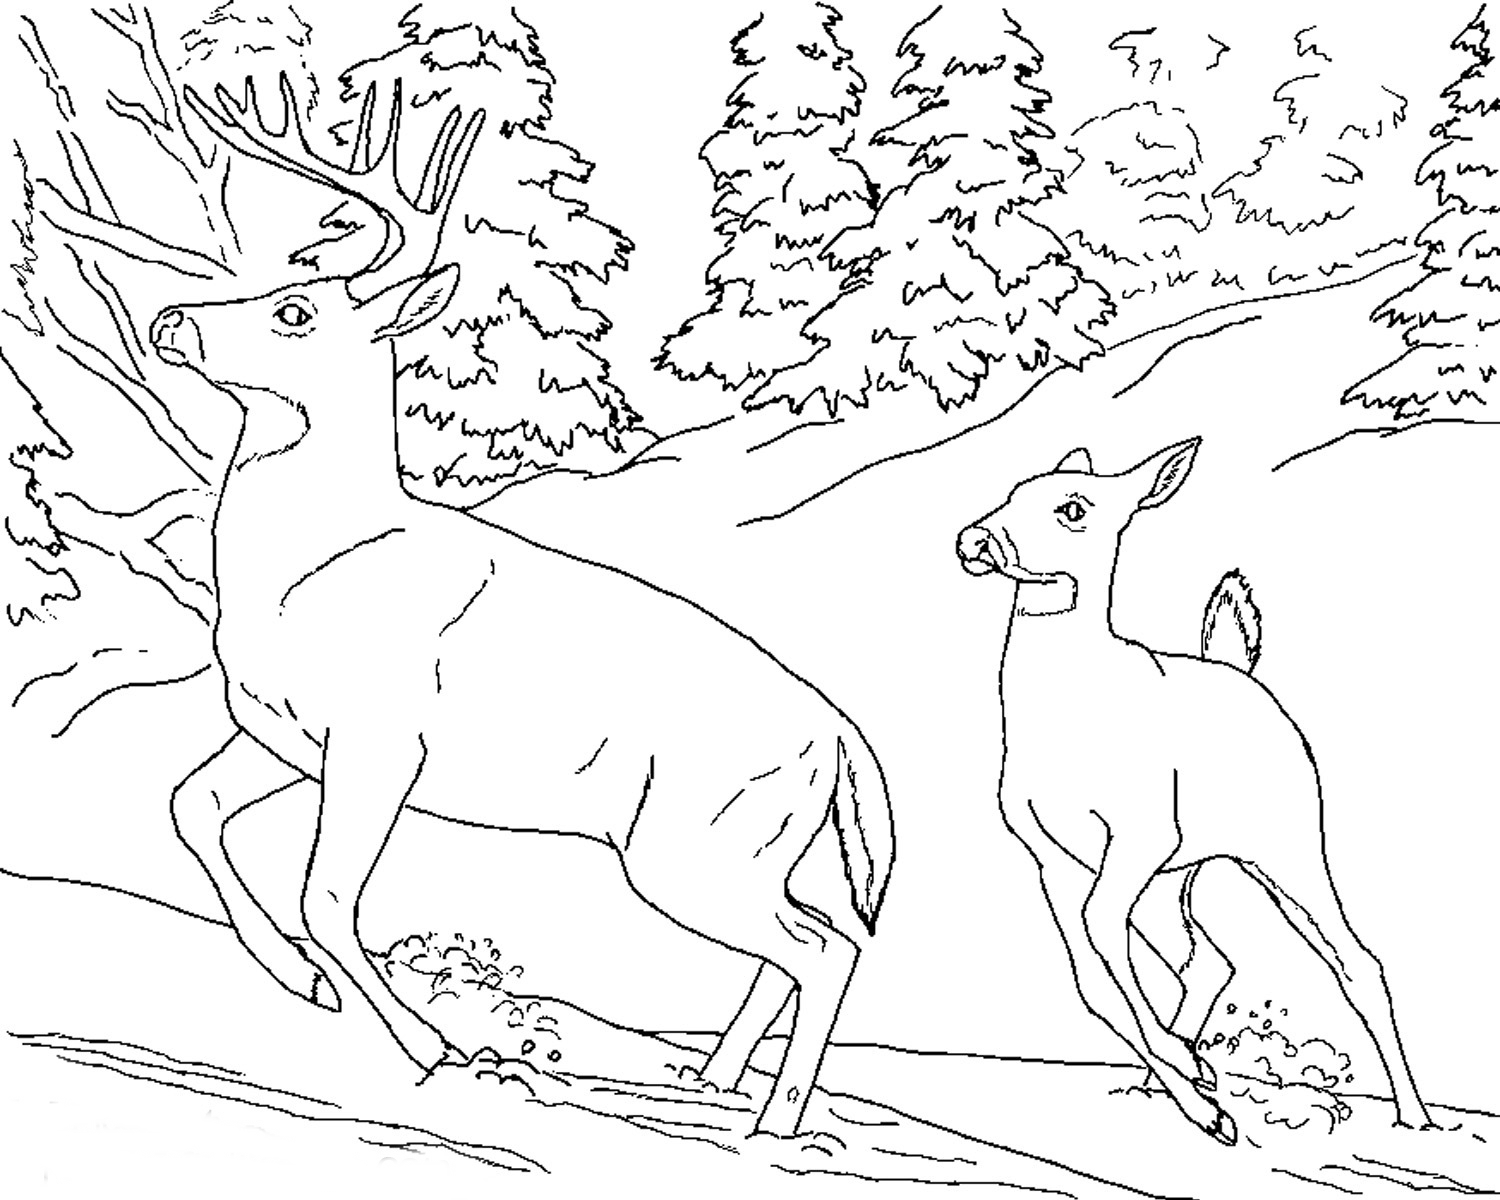 Florida animals coloring pages